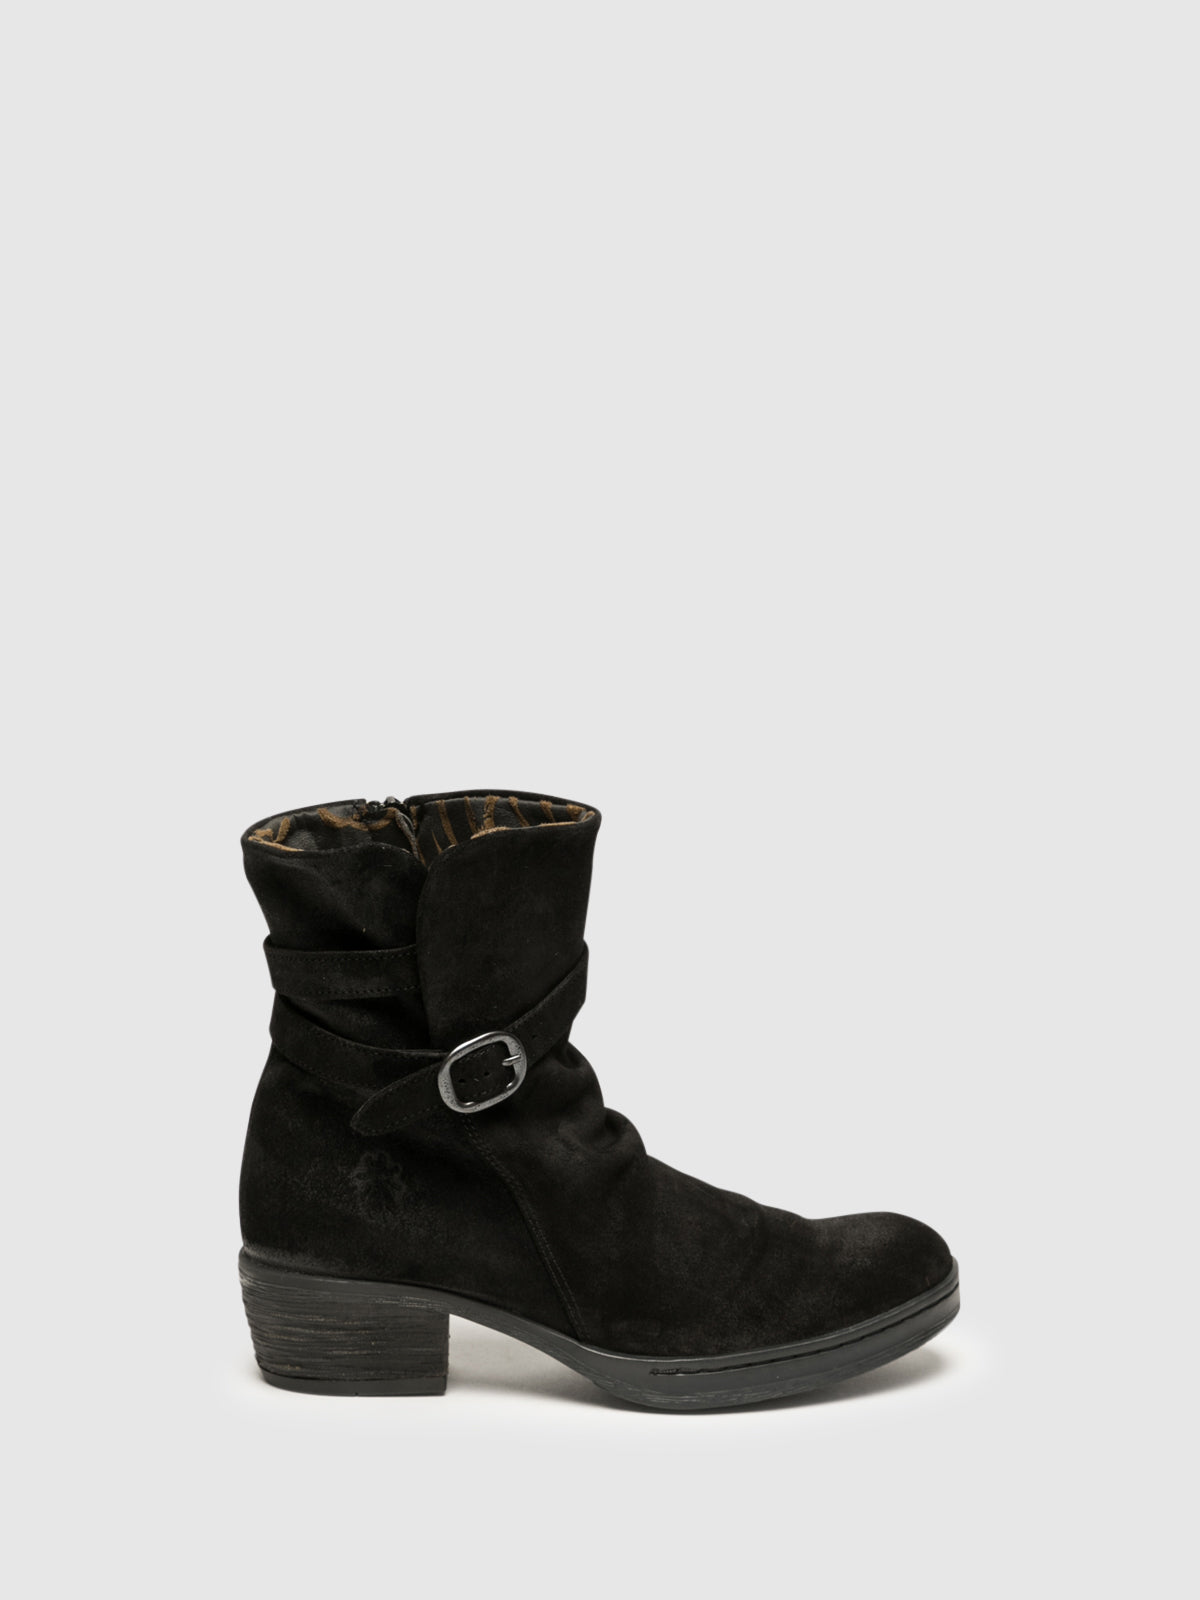 Fly London Black Zip Up Ankle Boots